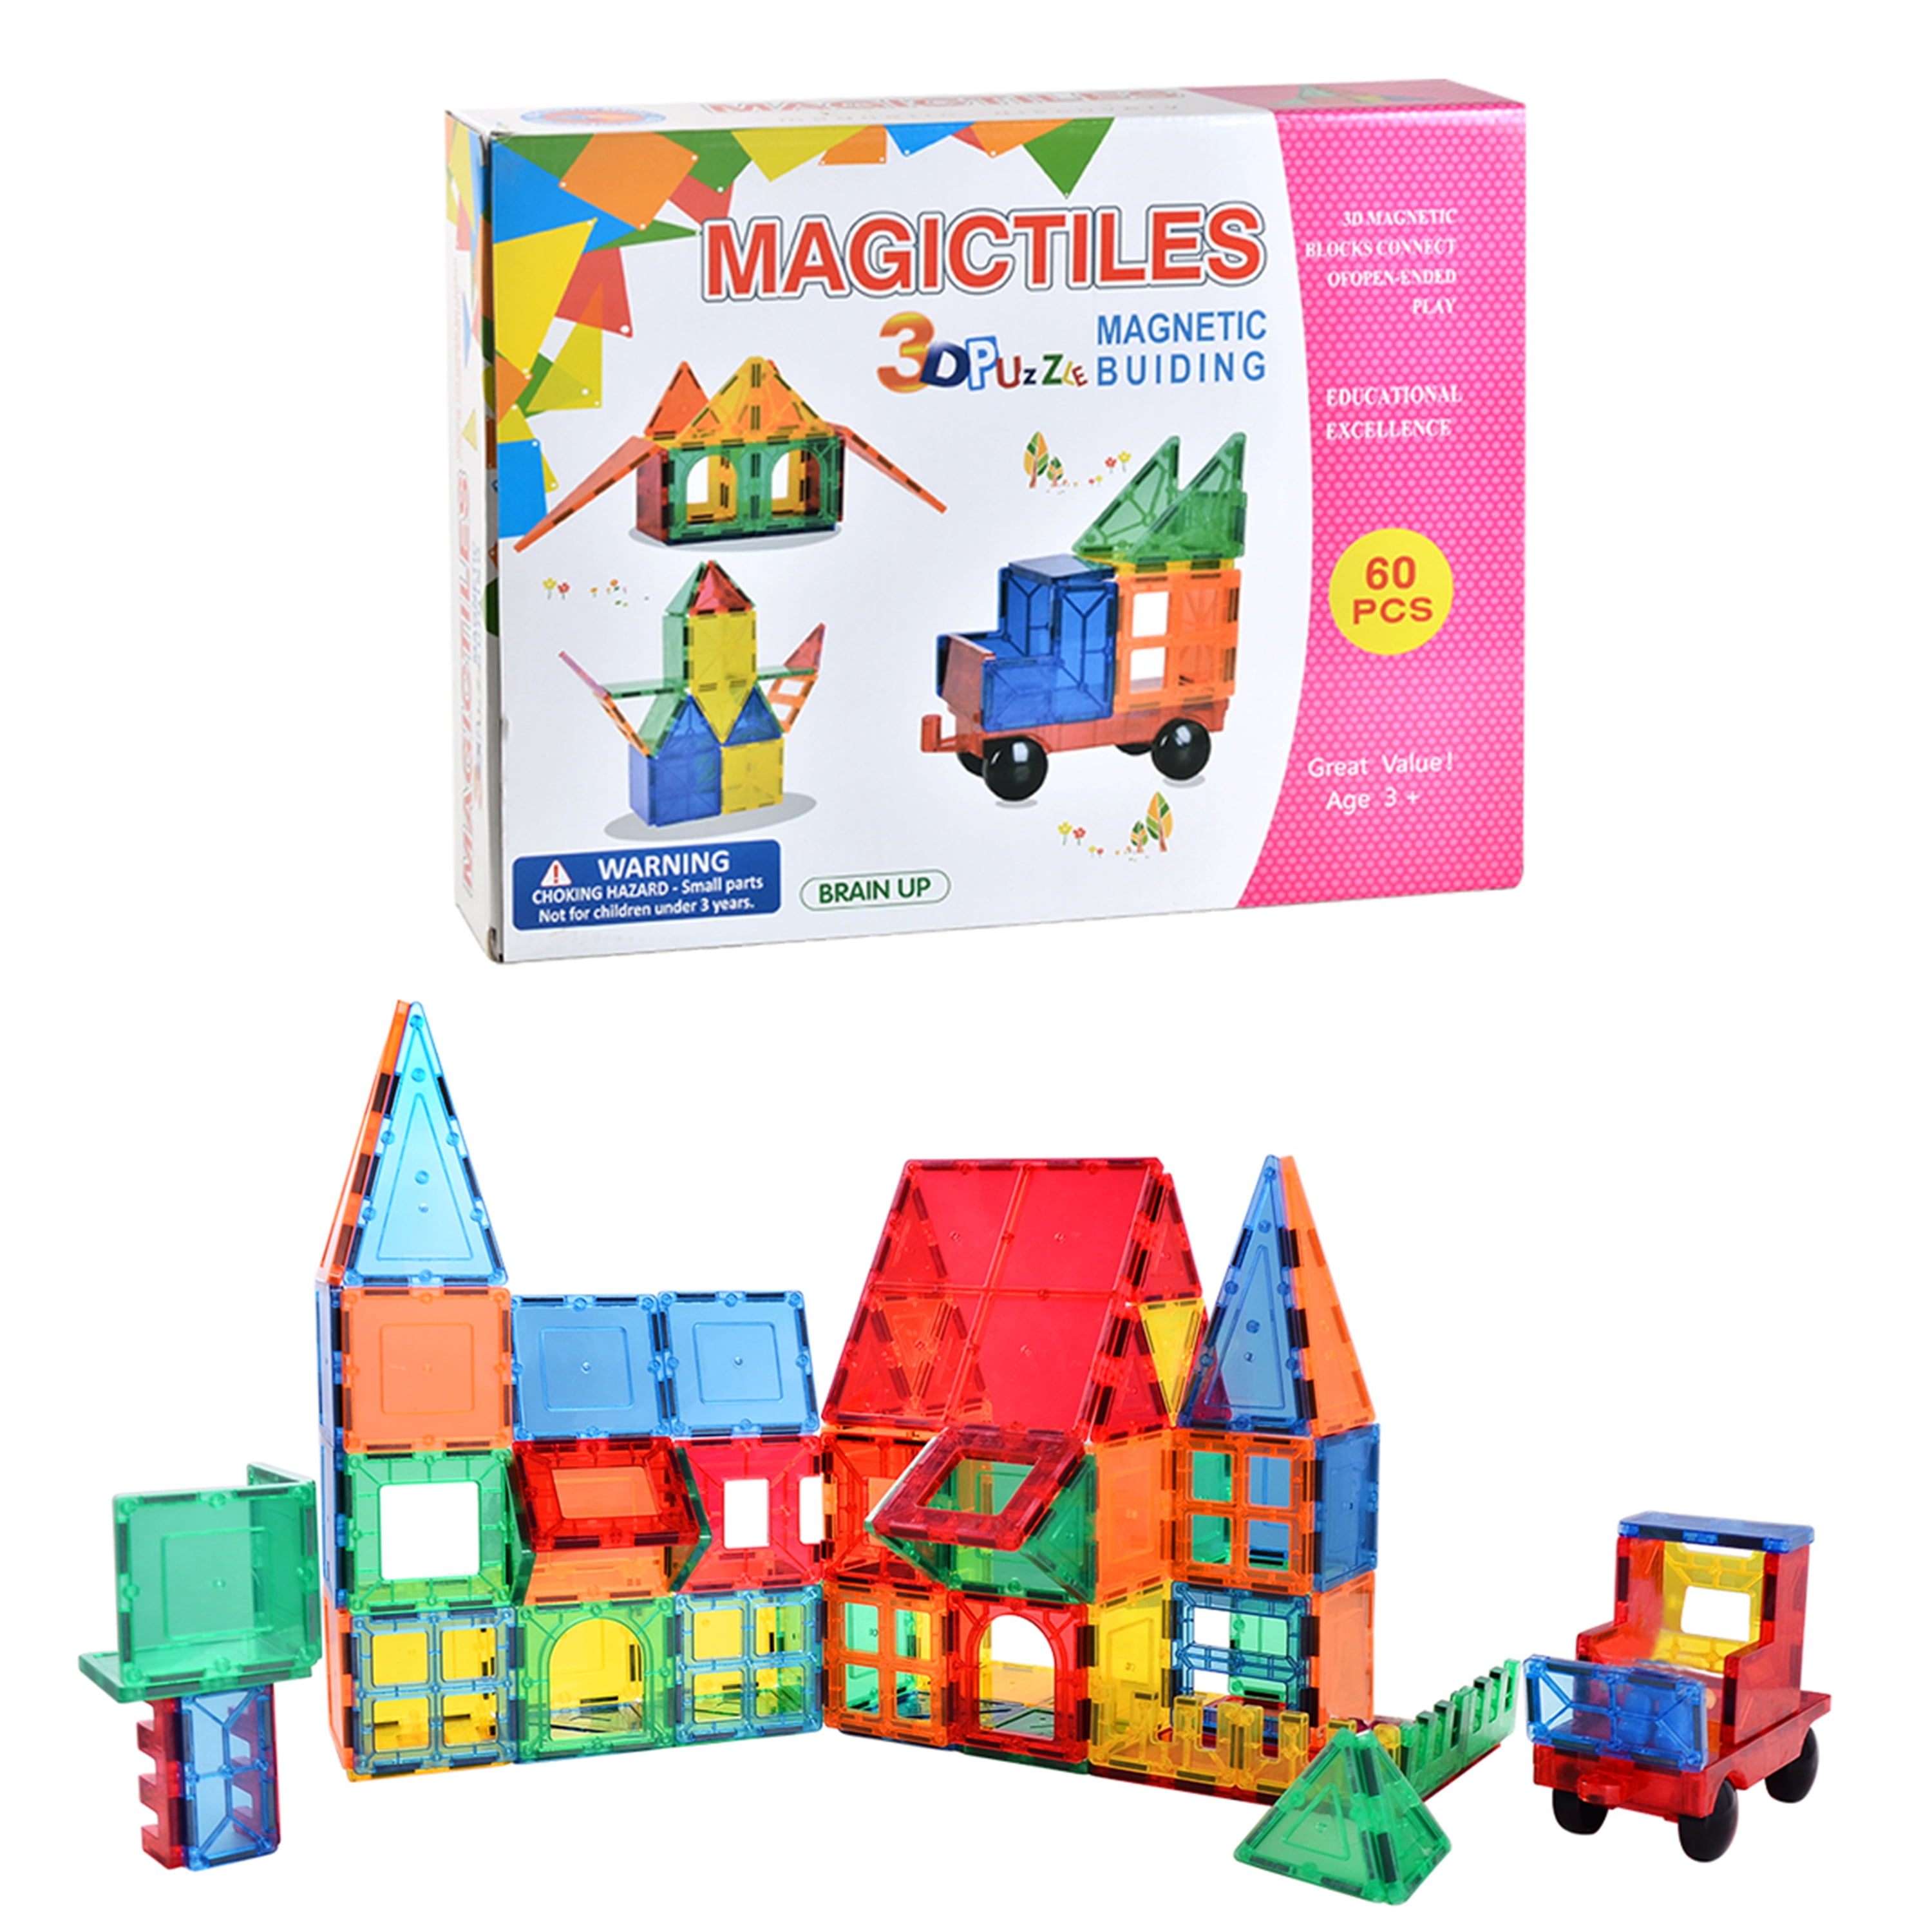  Playmags Magnetic Tiles, 18Pcs Magnetic Building Bricks,  Exclusive Magnetic Blocks, Skill Development, Ages 3+ (Small Bricks Tiles)  : Toys & Games